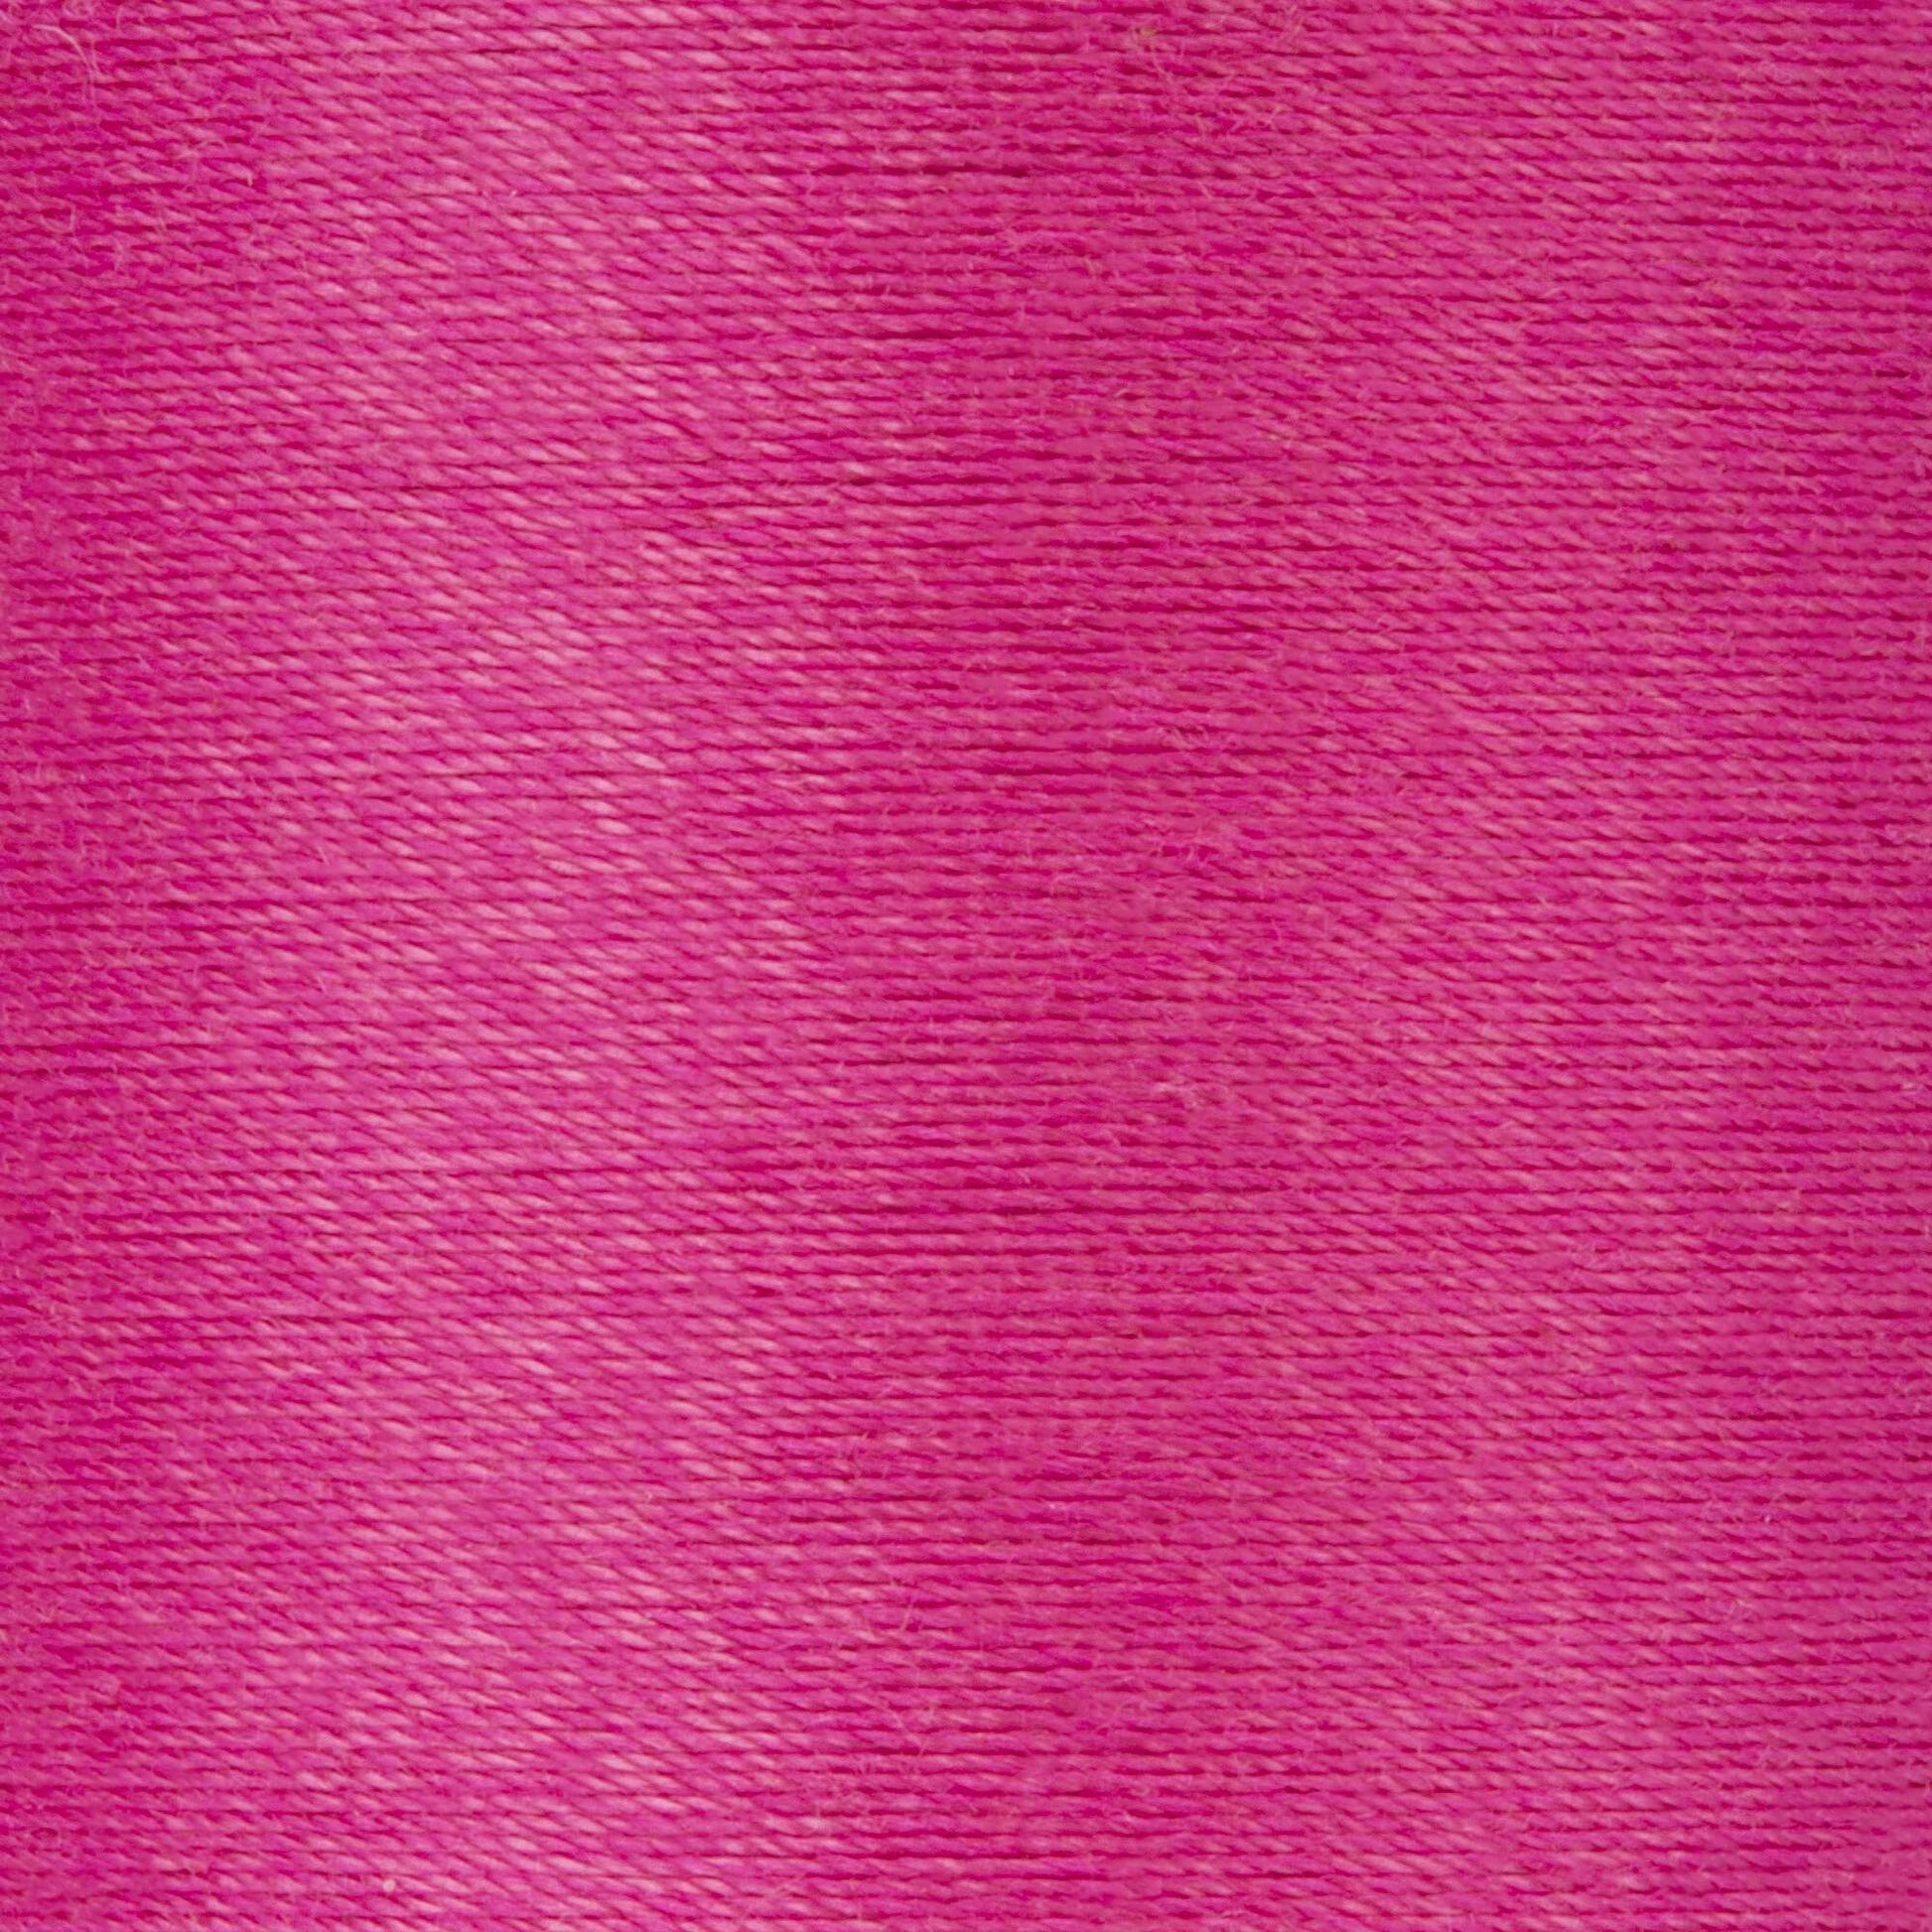 Coats & Clark Cotton Covered Quilting & Piecing Thread (500 Yards) Hot Pink